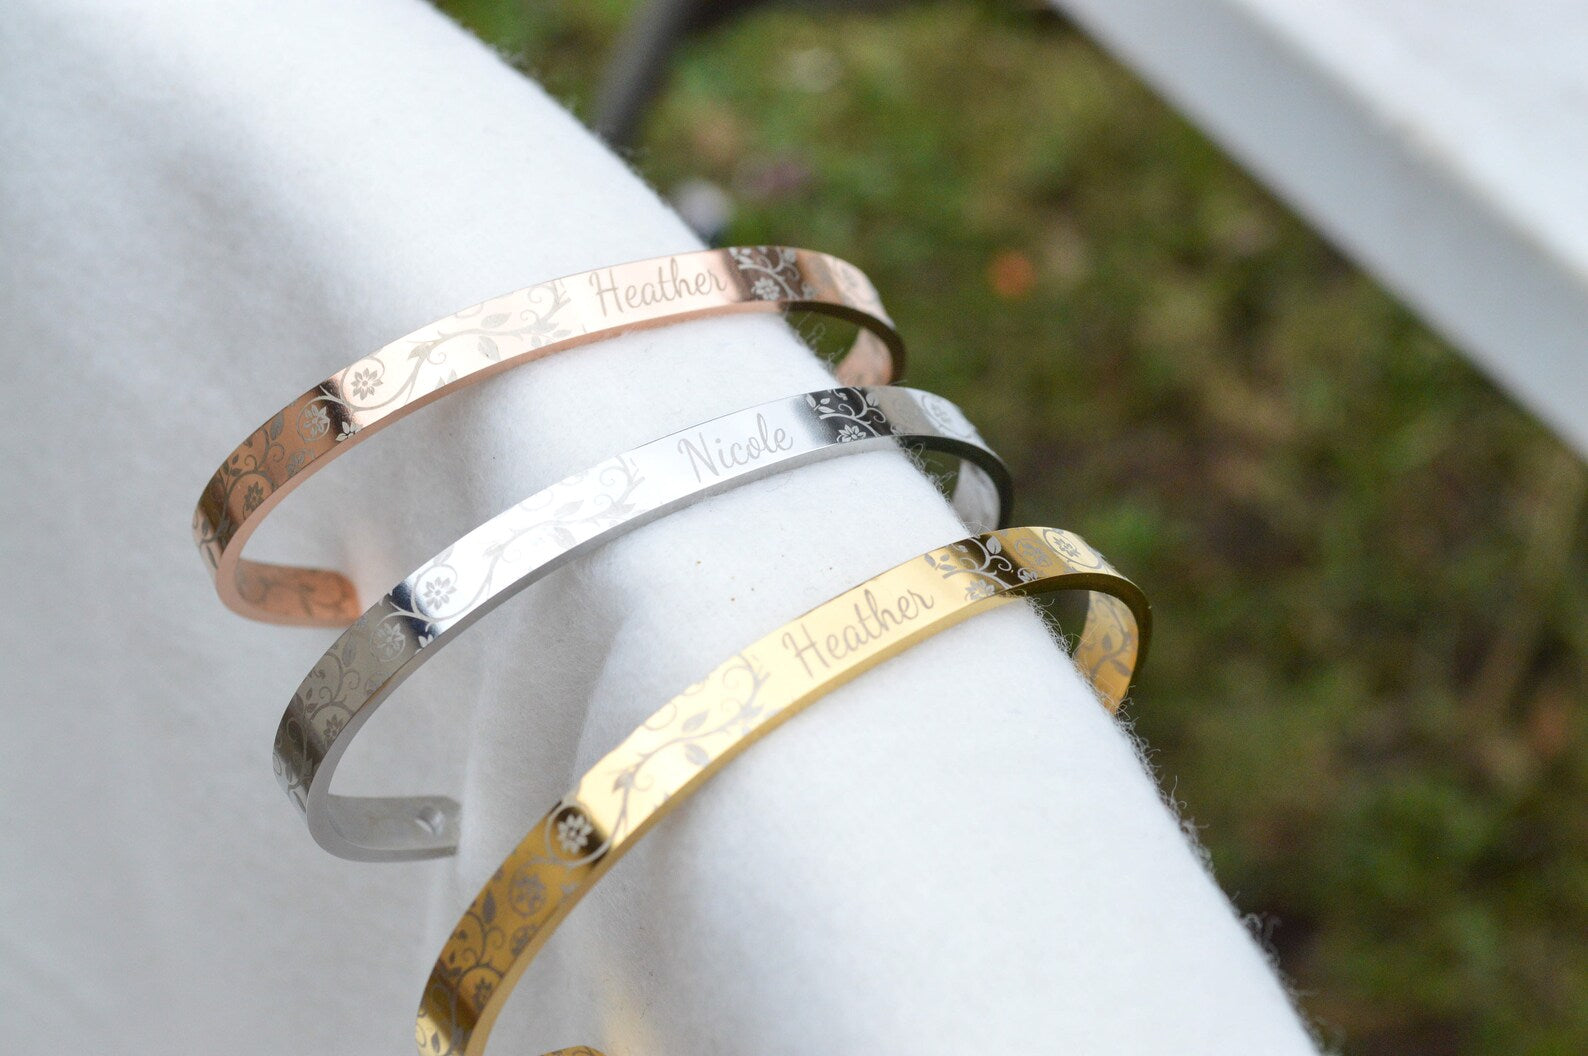 Modern Meaningful Jewellery - Personalized Jewellery and Gifts – The  Mindful Company